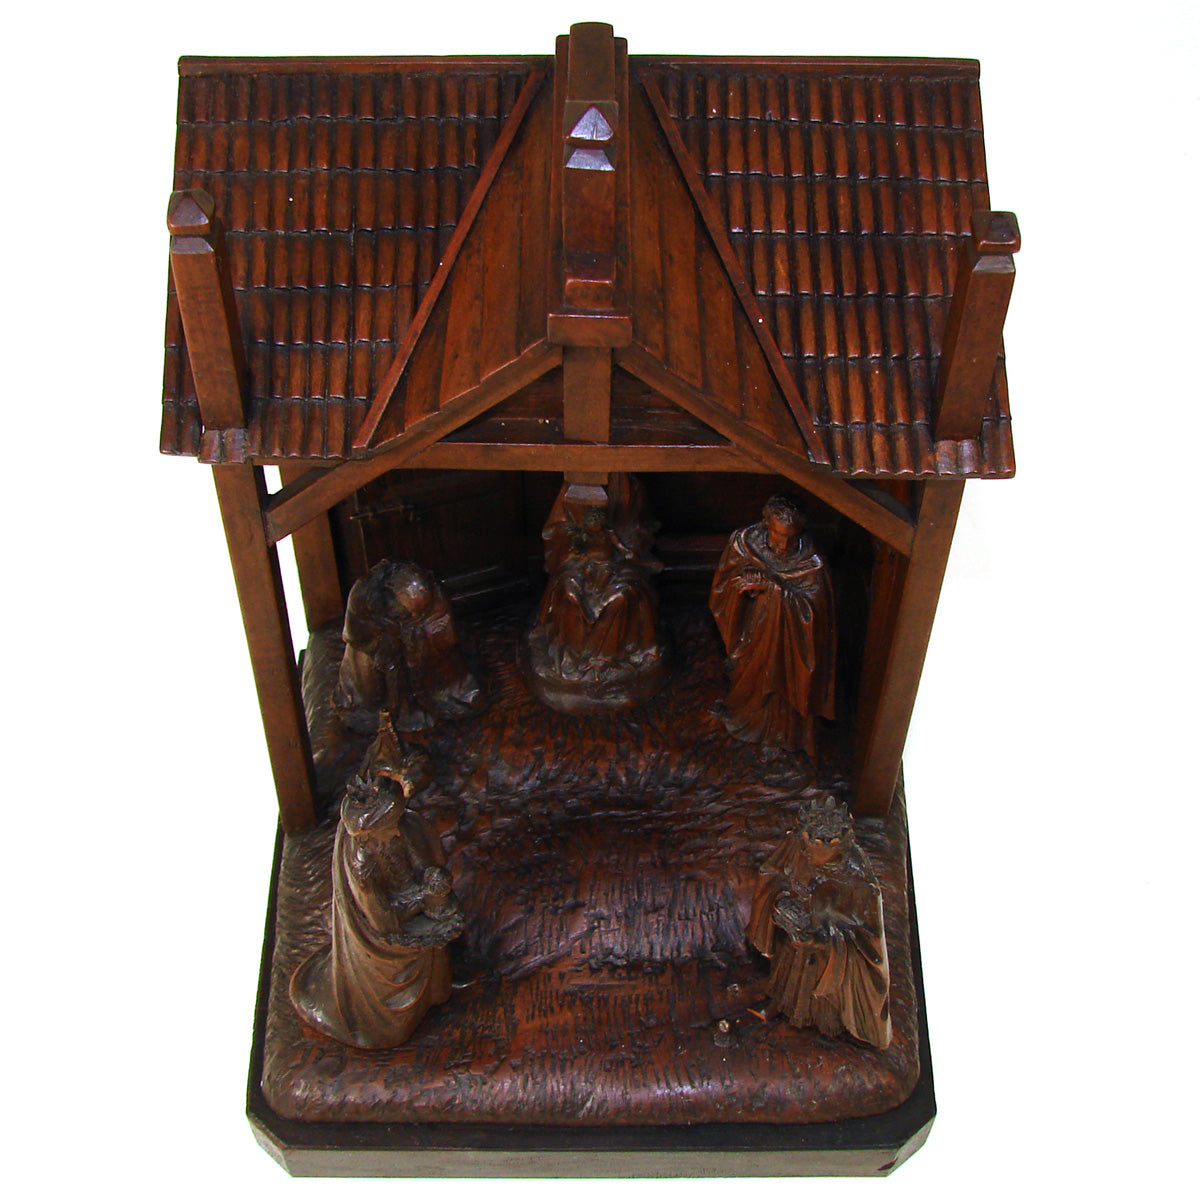 Exq Antique French or Italian Hand Carved Black Forest Style 10" Nativity Scene, Mary & Child Christ